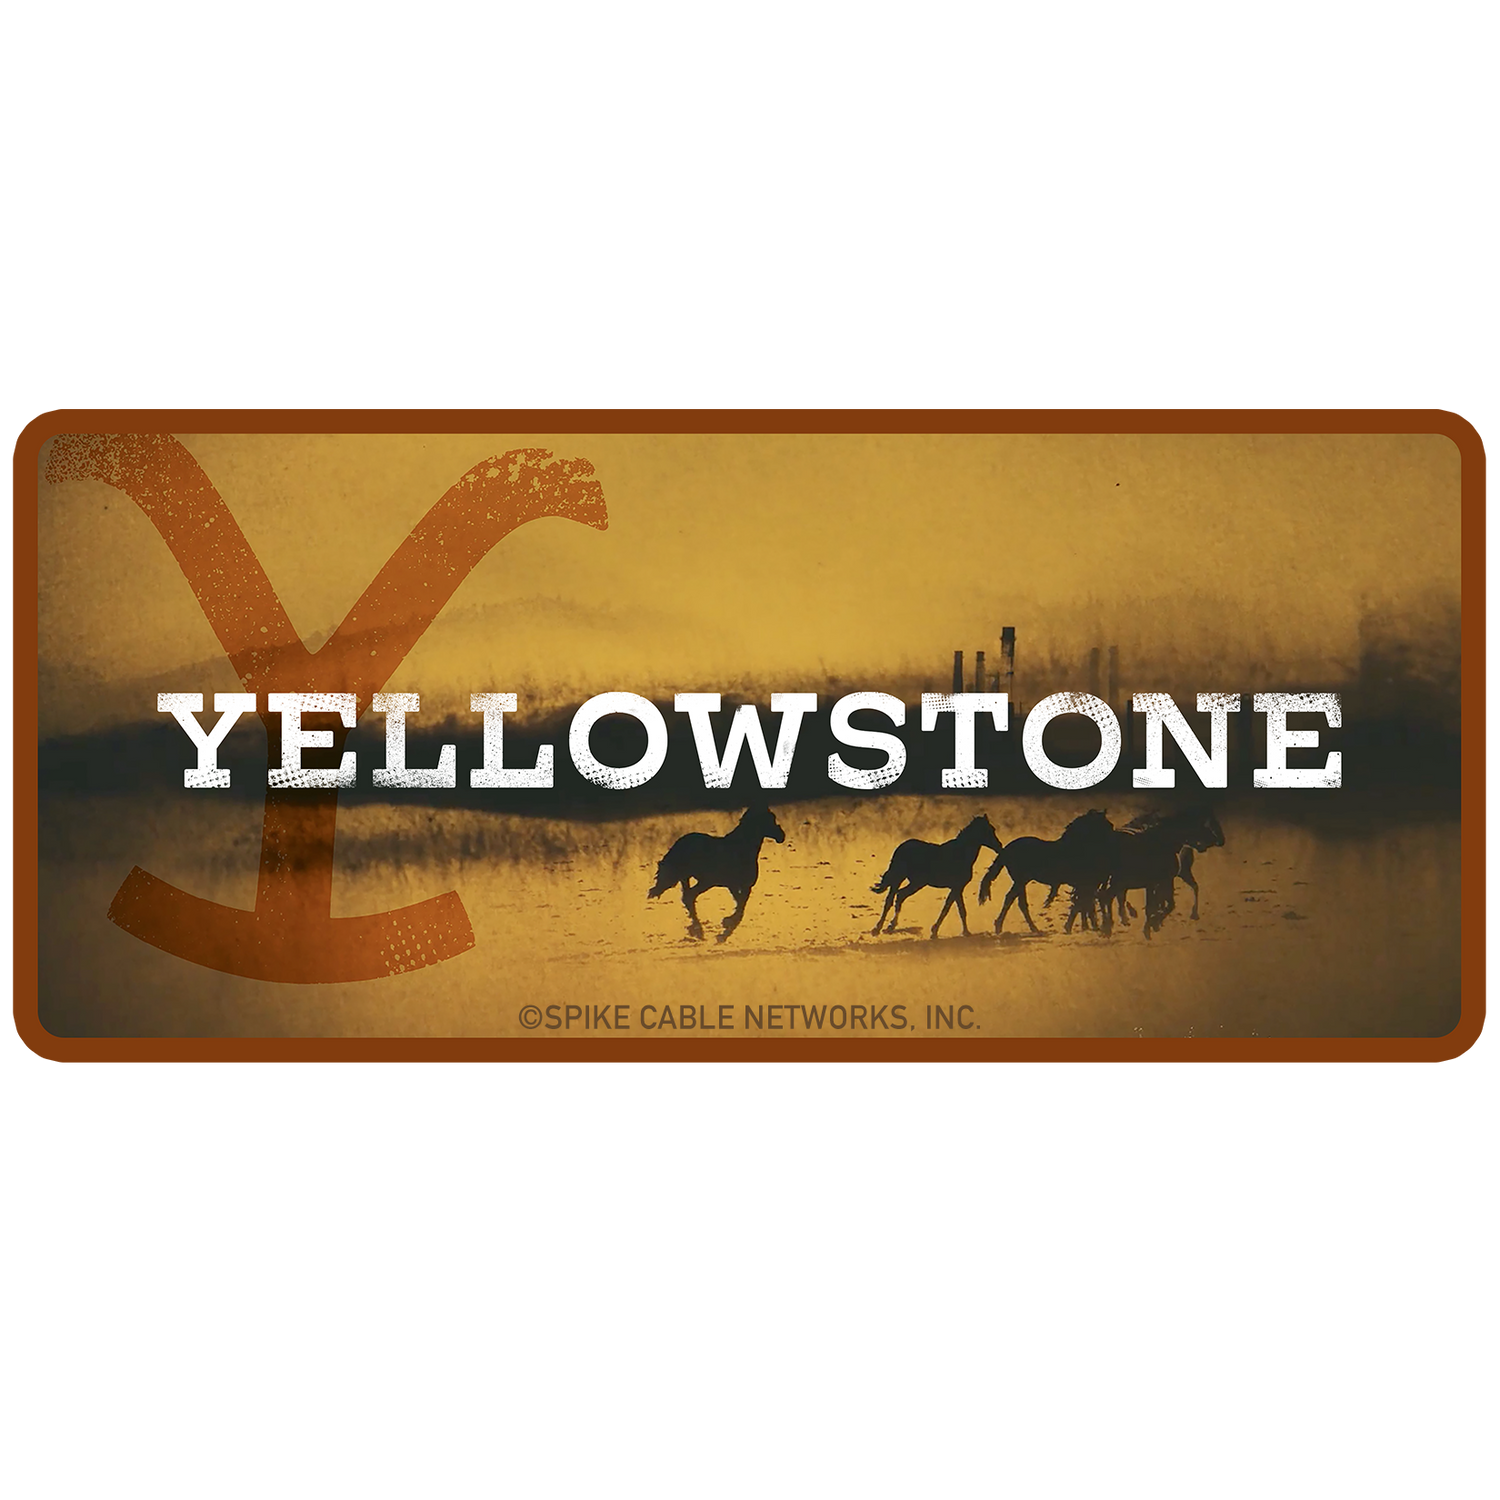 Yellowstone Dutton Ranch Logo Insulated Can Koozie – Paramount Shop